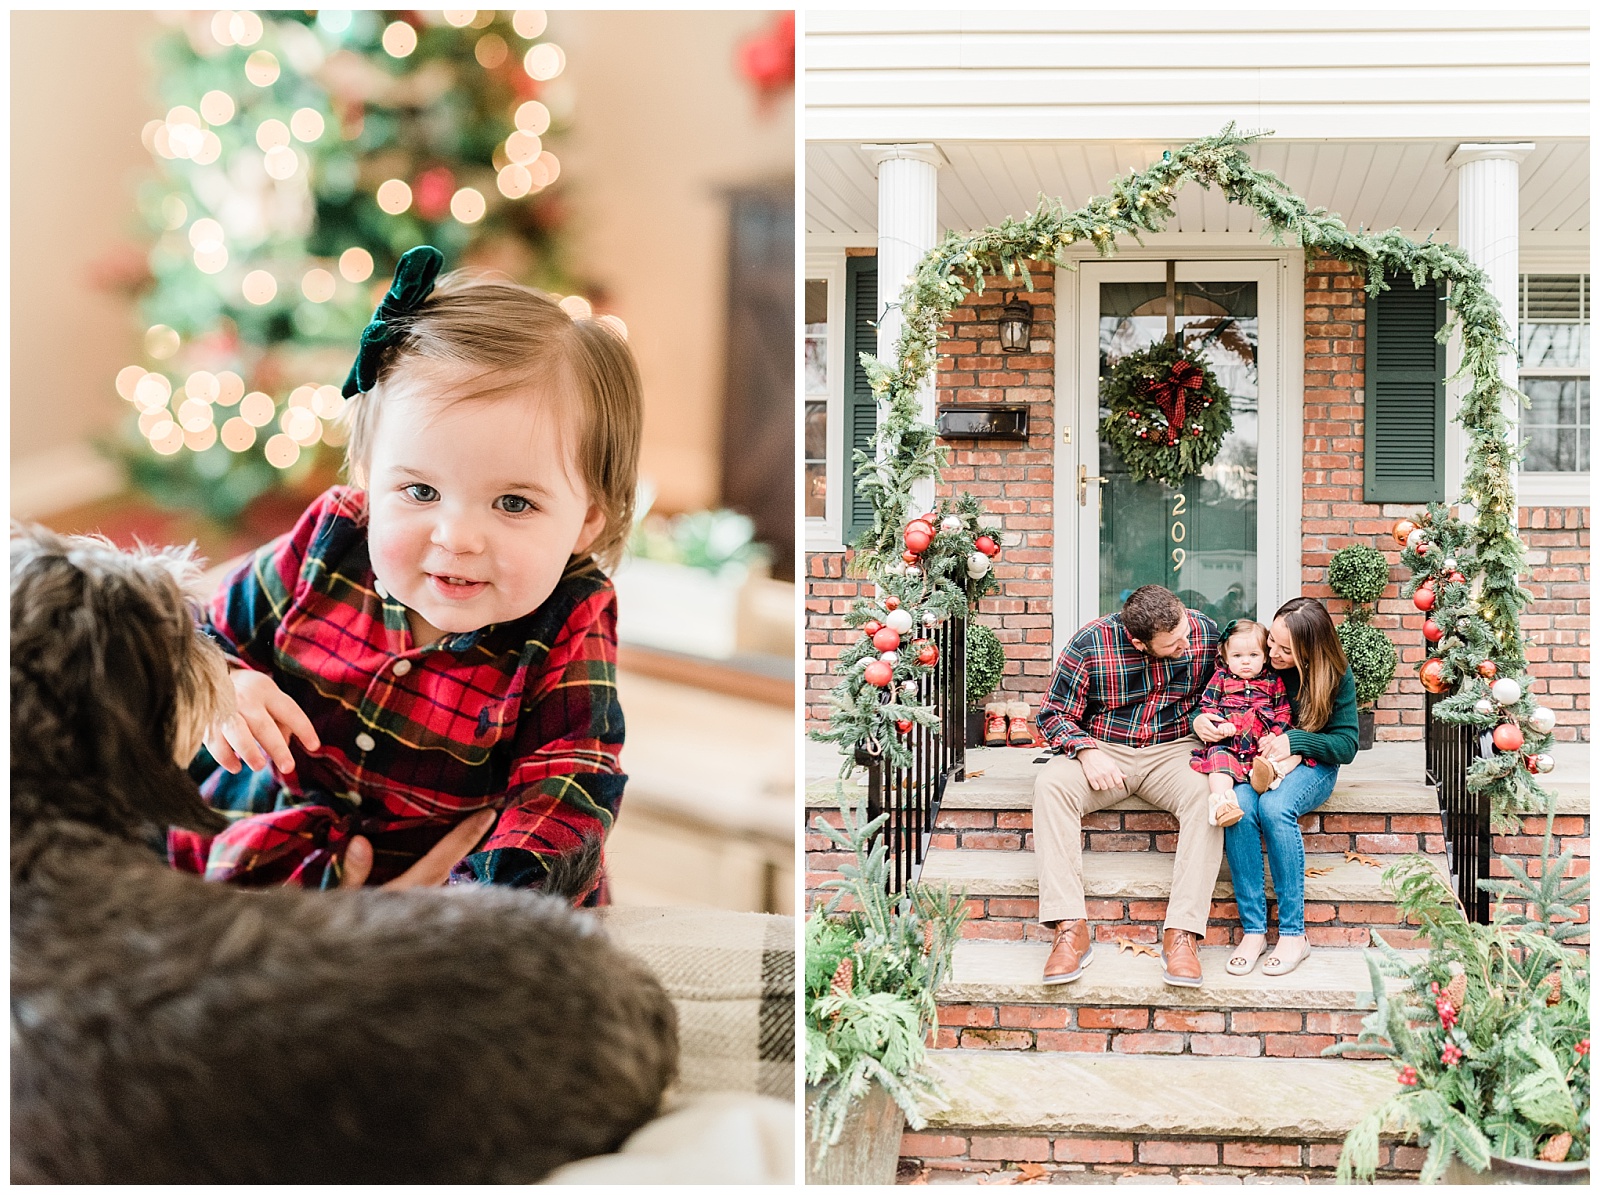 in-home-family-holiday-session-winter-christmas-cozy-photographer-nj-new-jersey-photo_0007.jpg